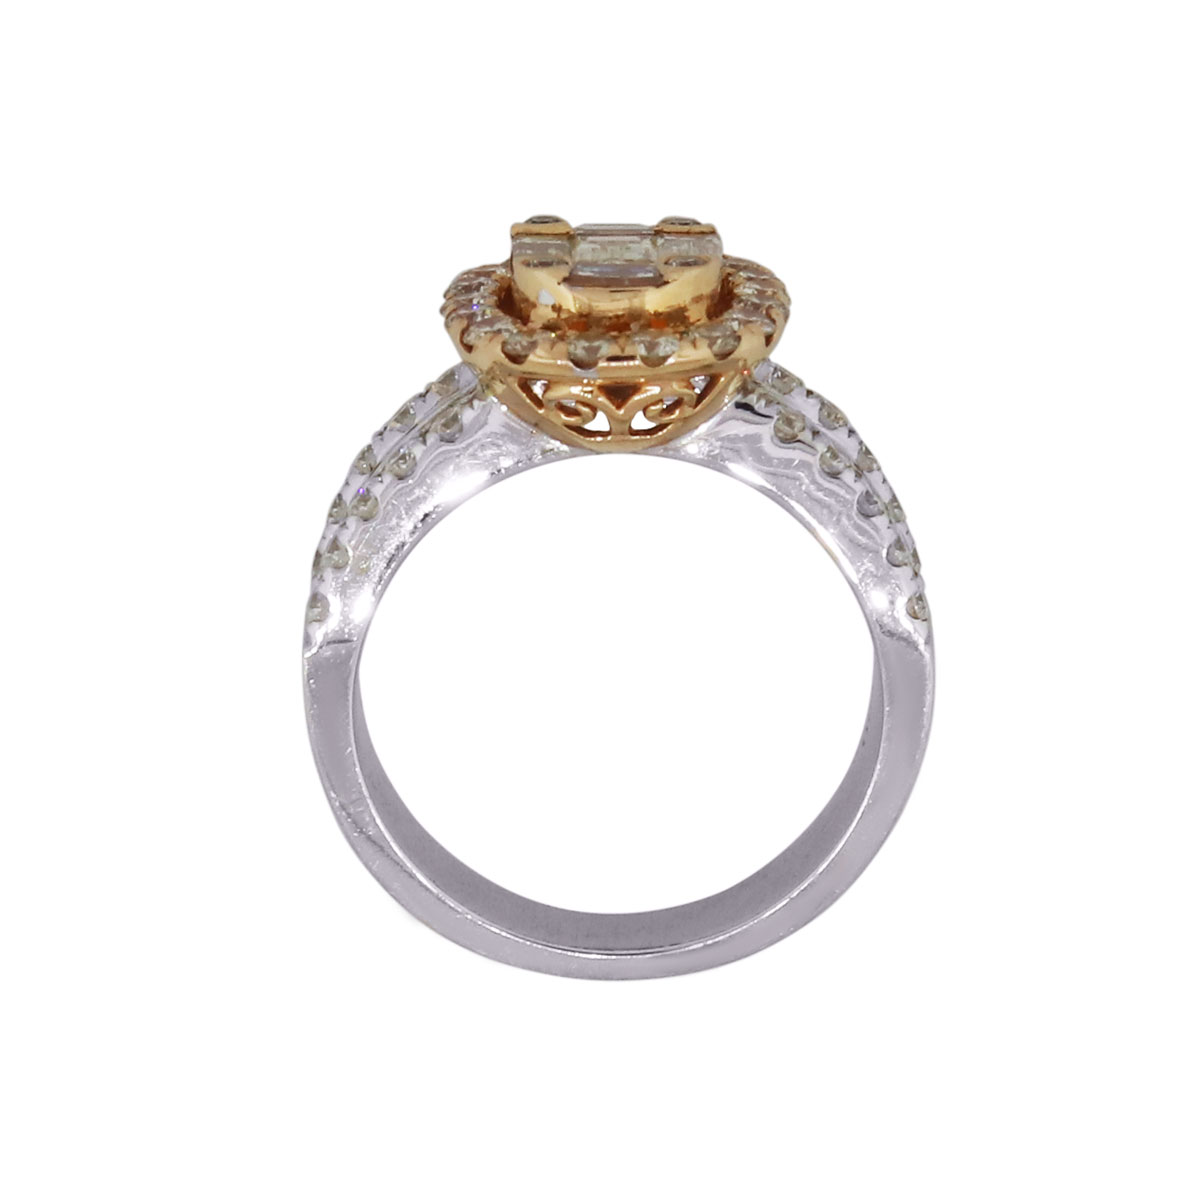 18k Two Tone Gold 2.37ctw Diamond Oval Halo Mosaic Engagement Ring